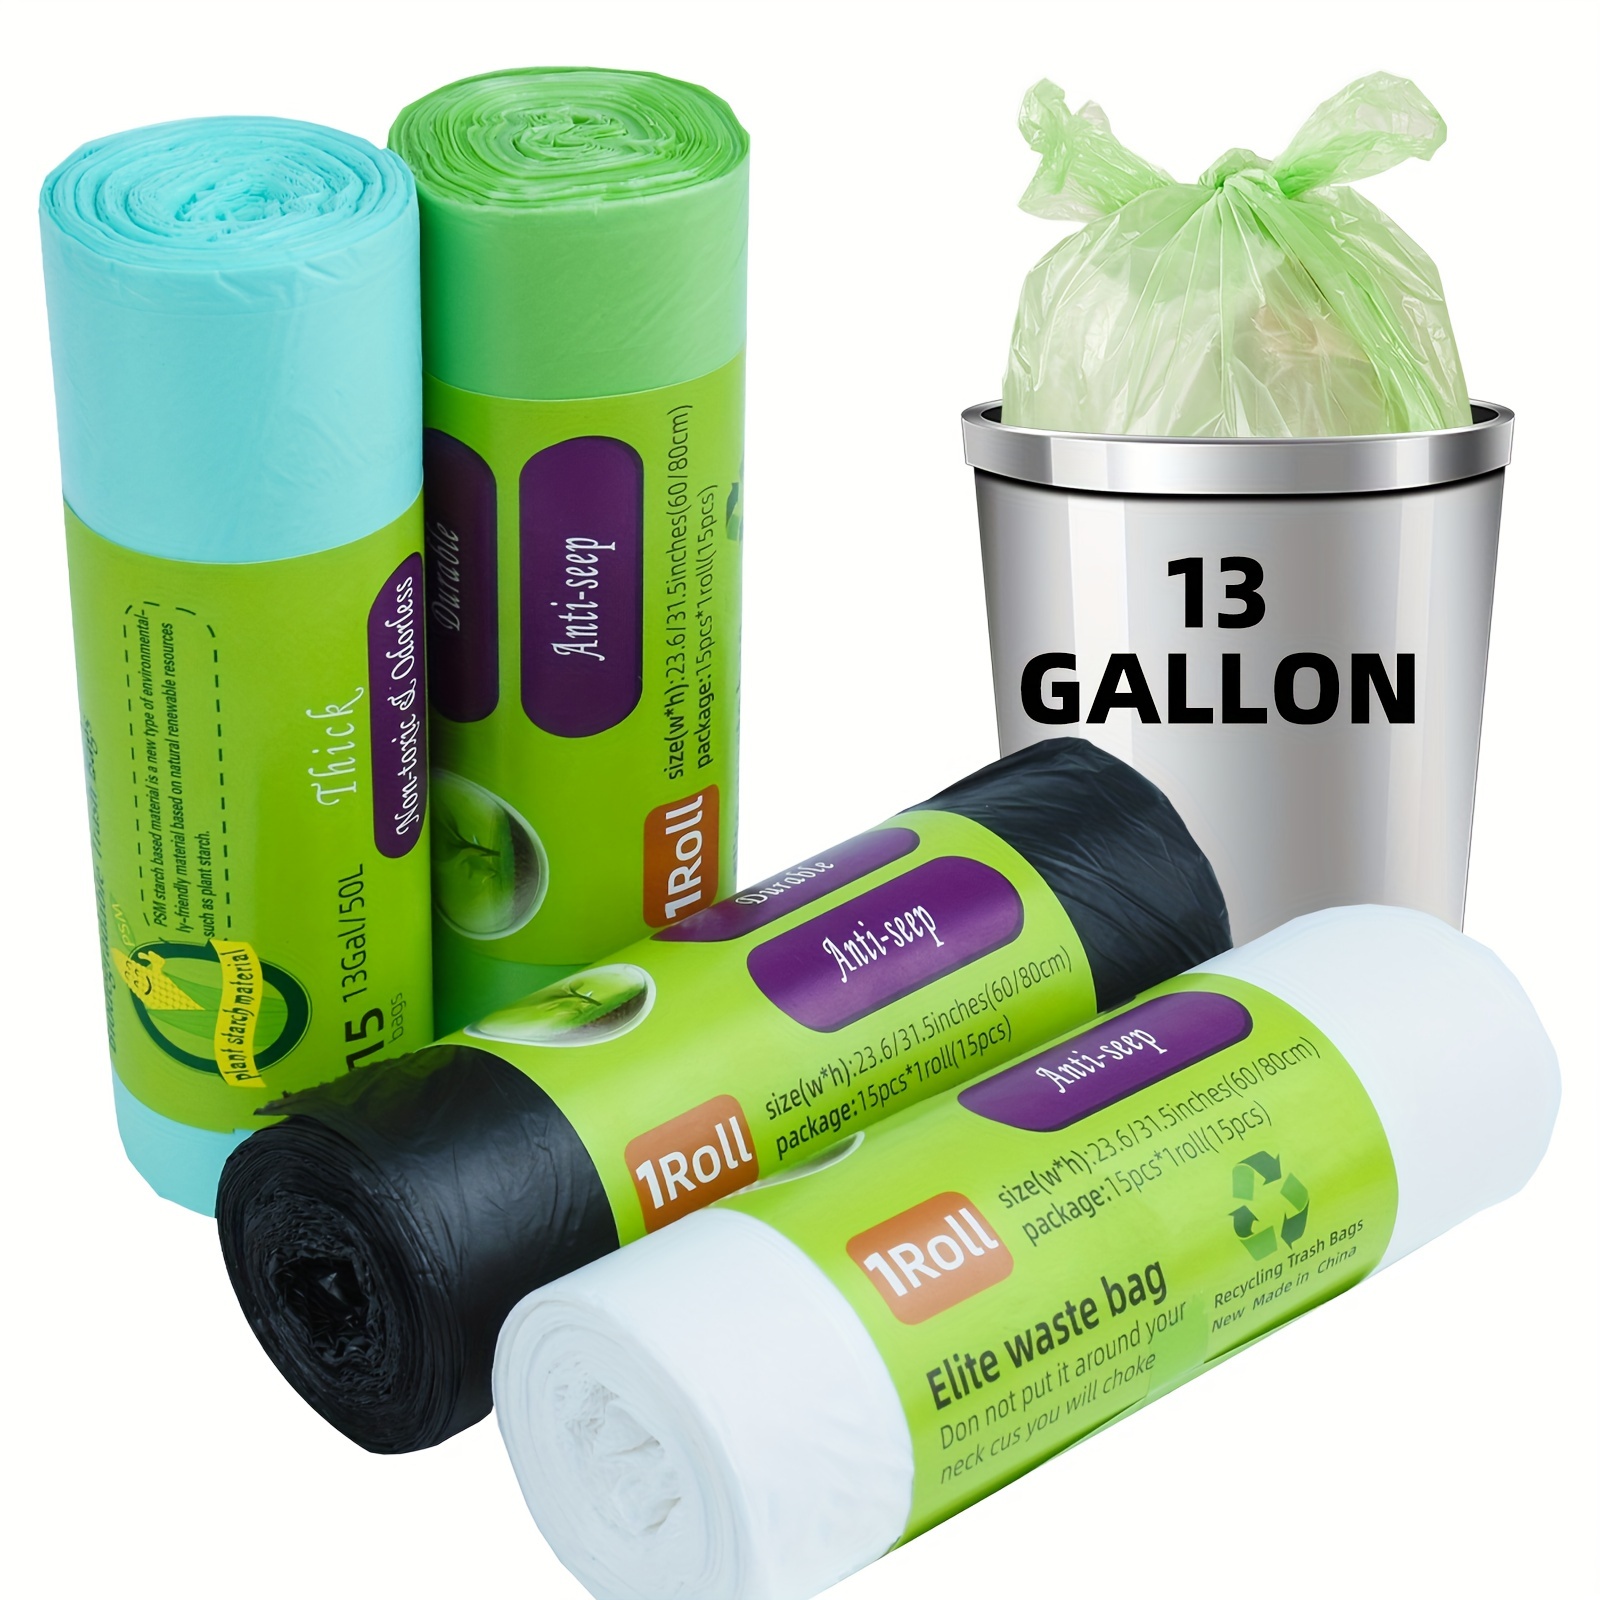 15 Bags 13 Gallon Garbage Bags Can Be Biodegradable, Super Thick